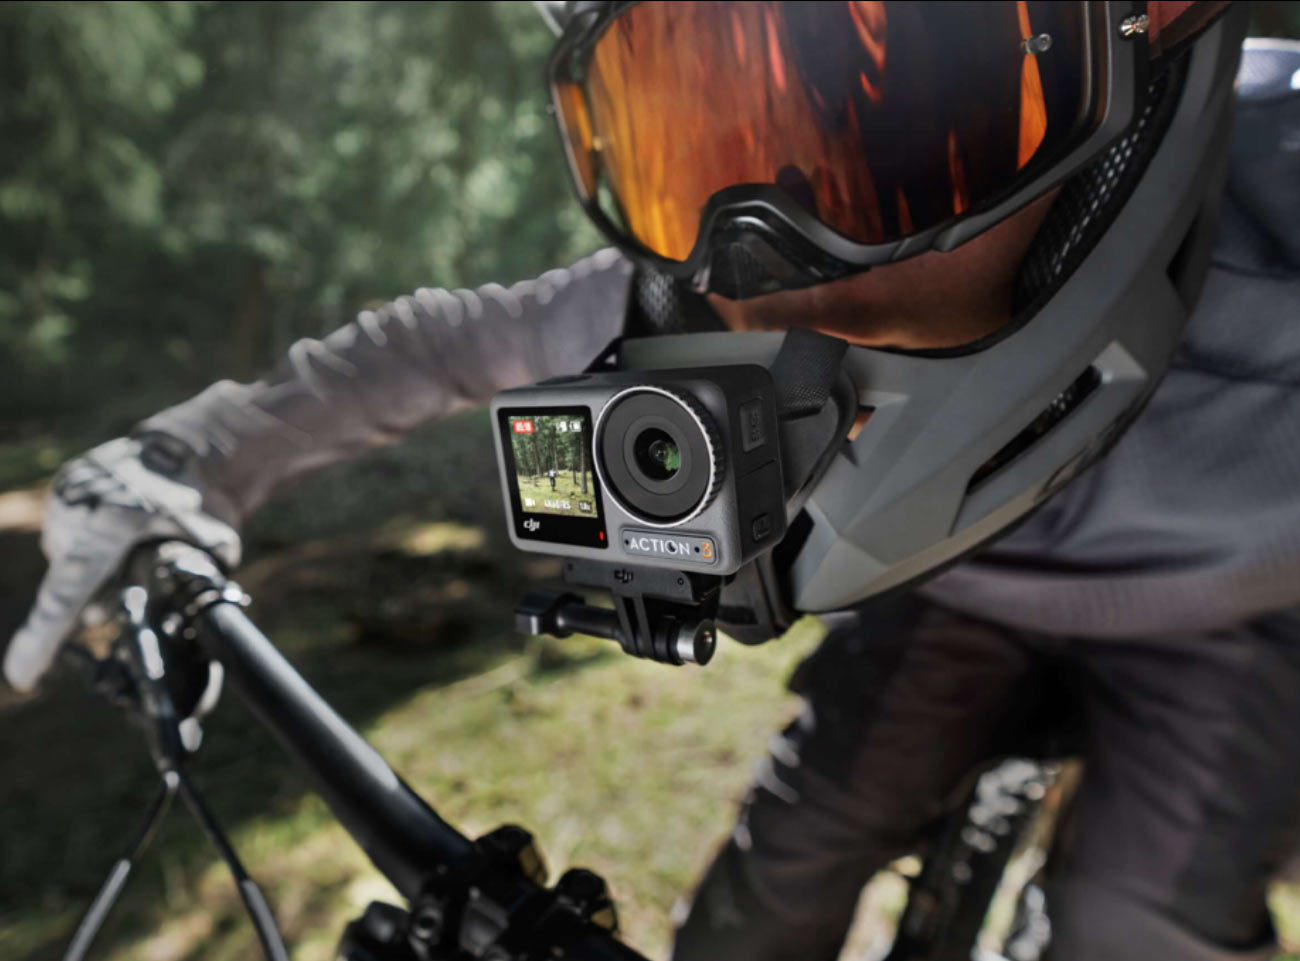 DJi Action 3 camera mounted on the chin bar of a full face mountain bike helmet